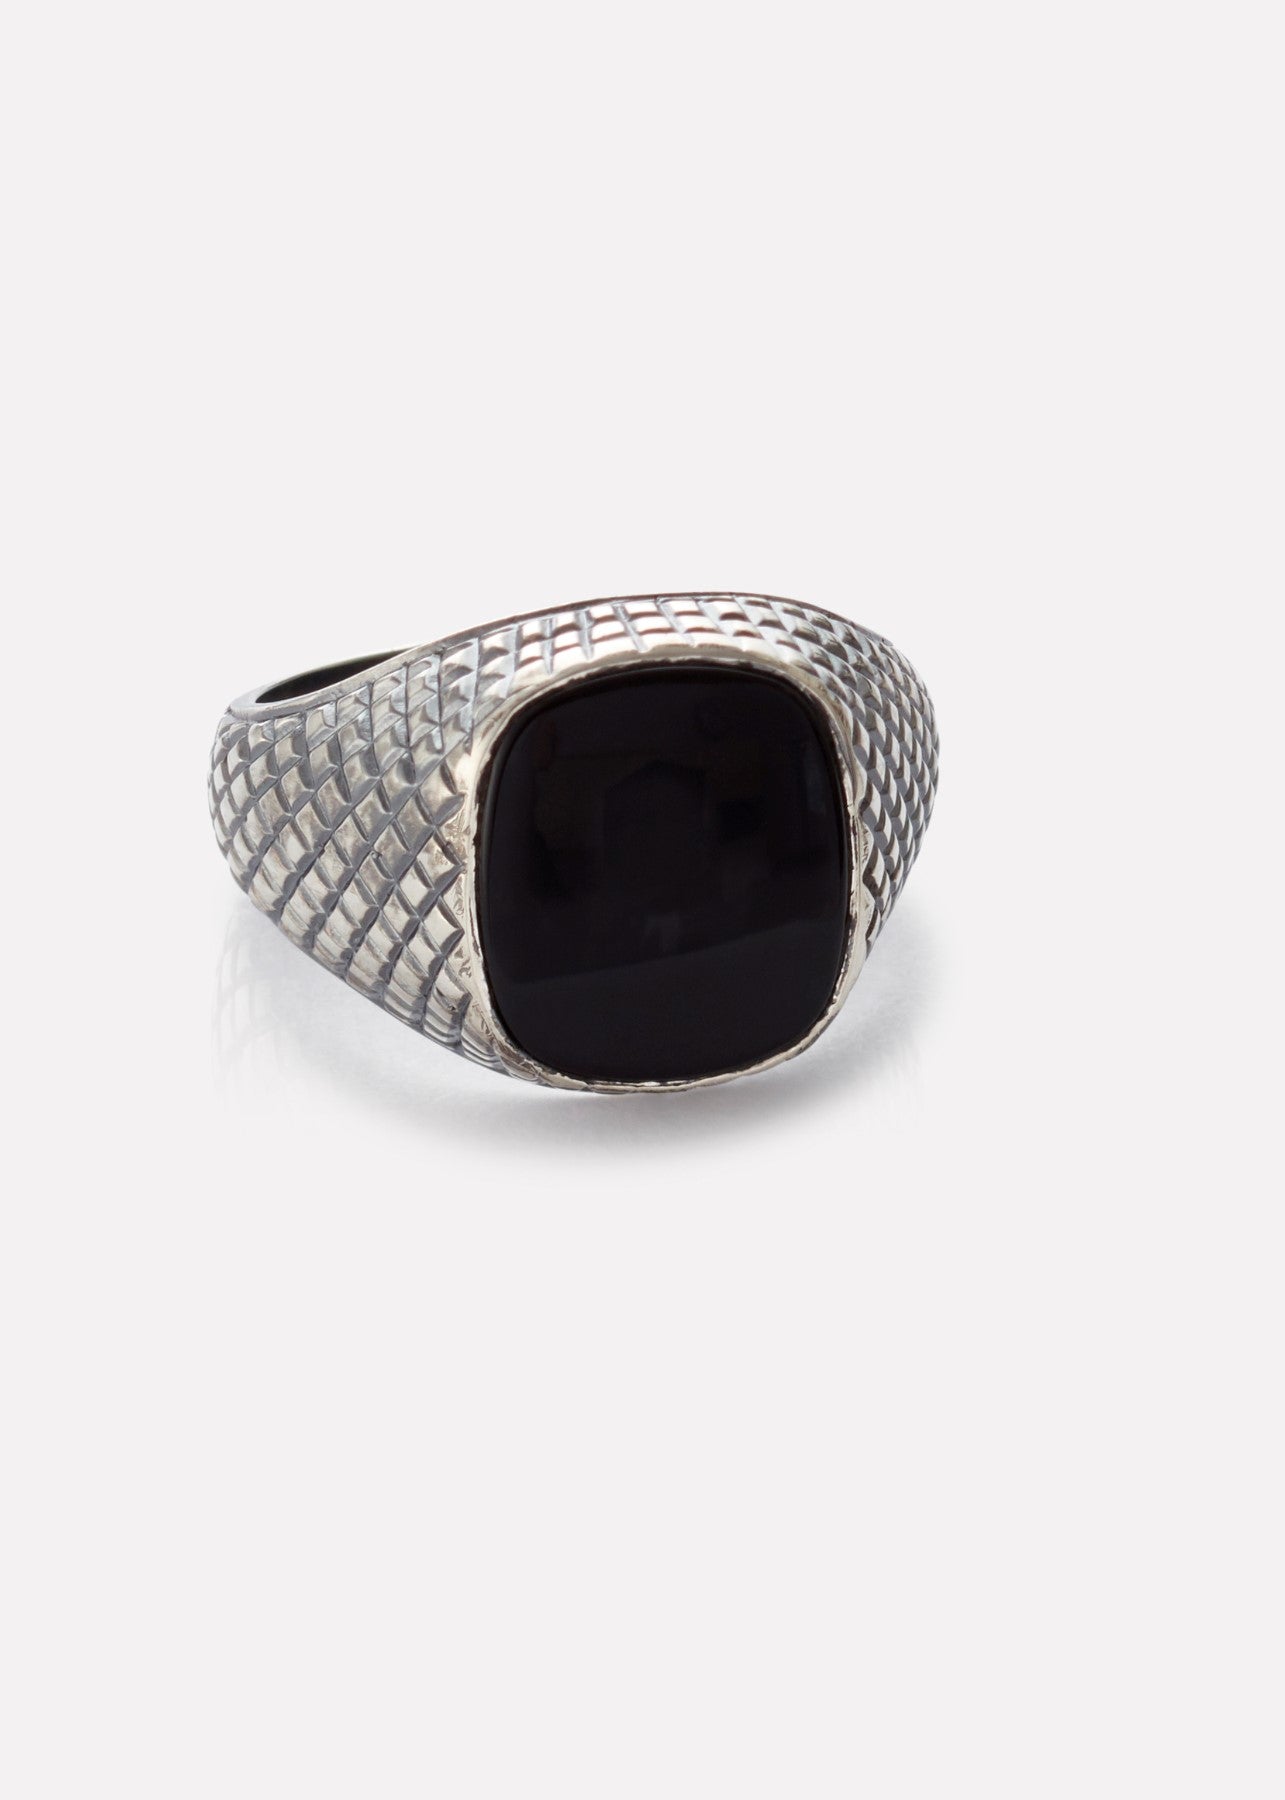 Unisex ring with Onyx in oxidized silver